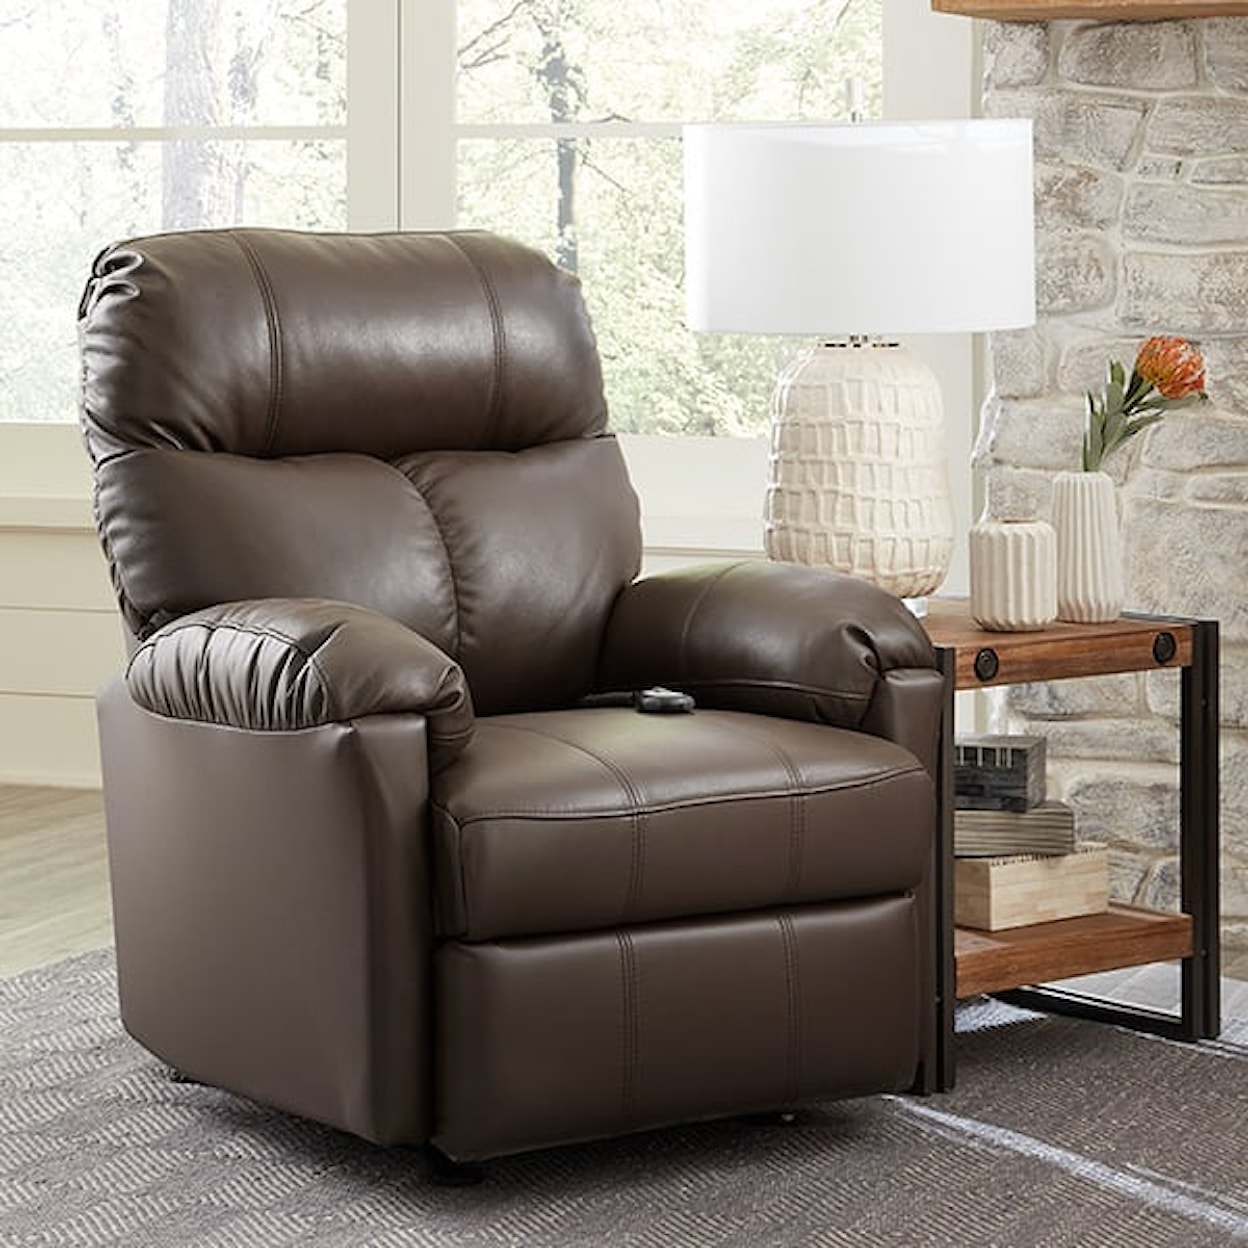 Best Home Furnishings Picot Power Space Saver Recliner